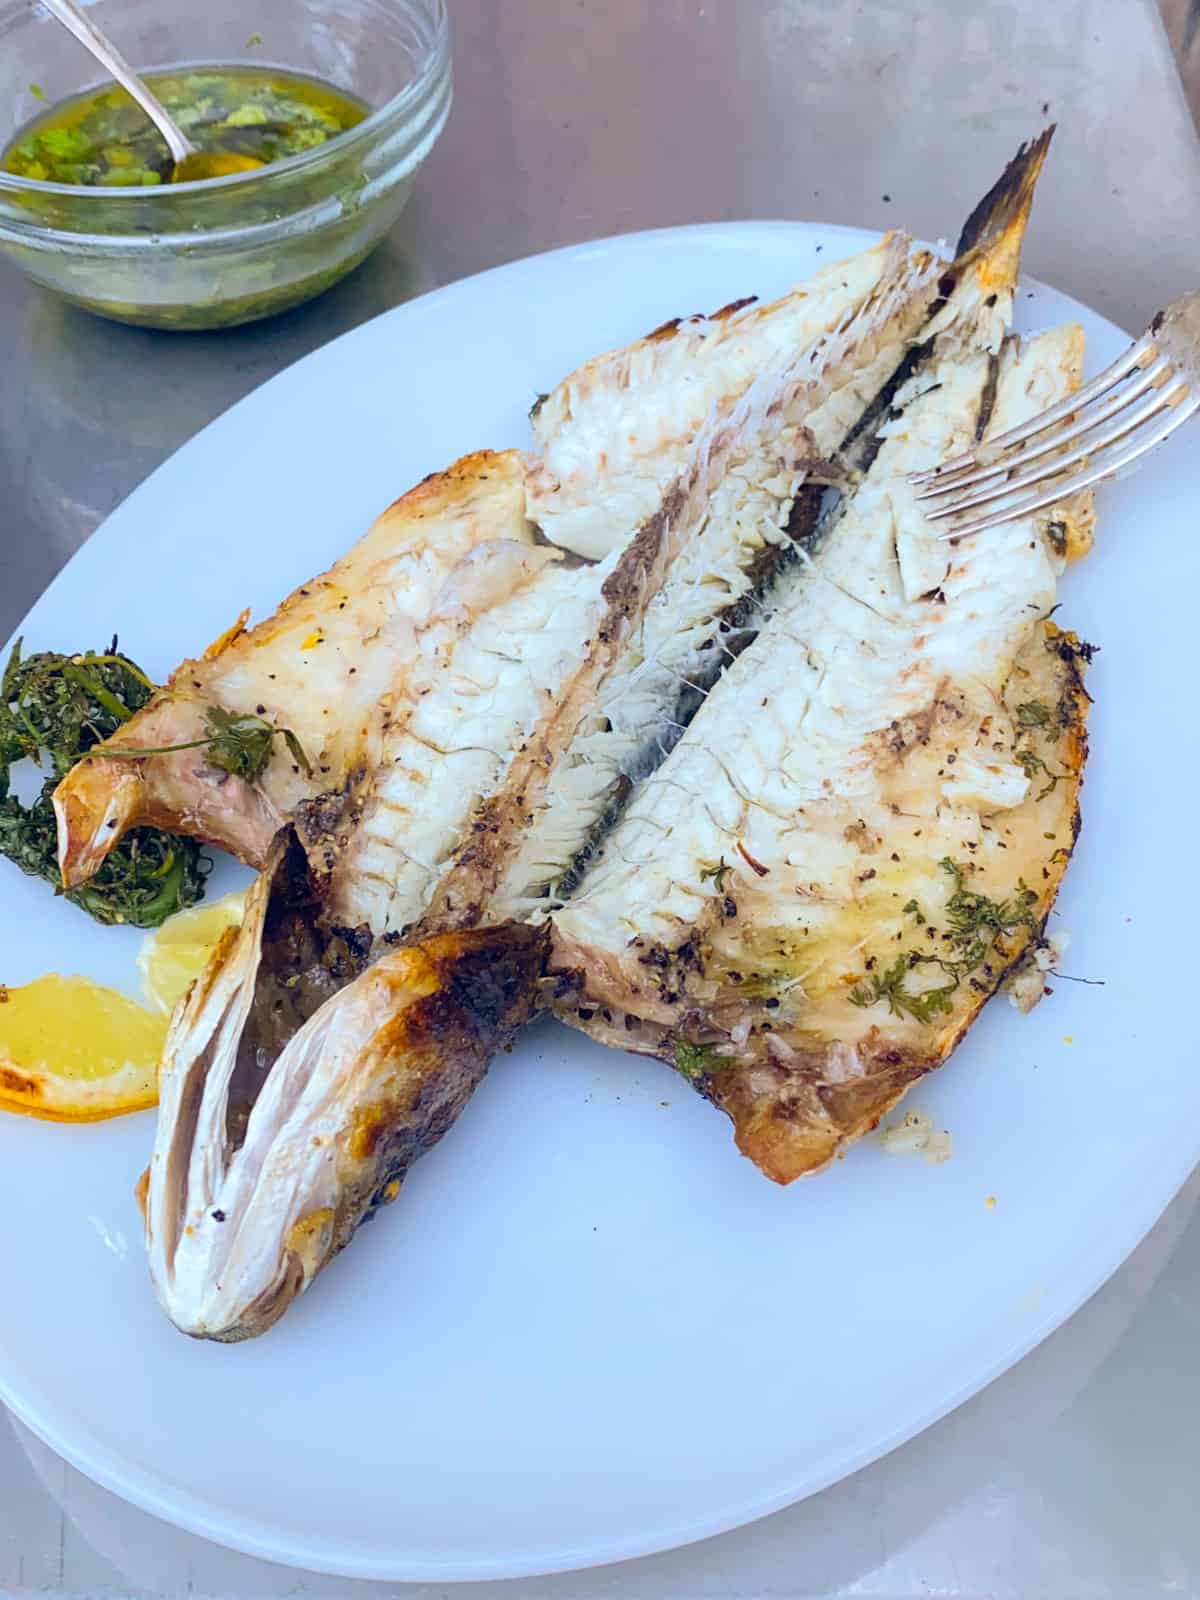 Open up the grilled branzino.